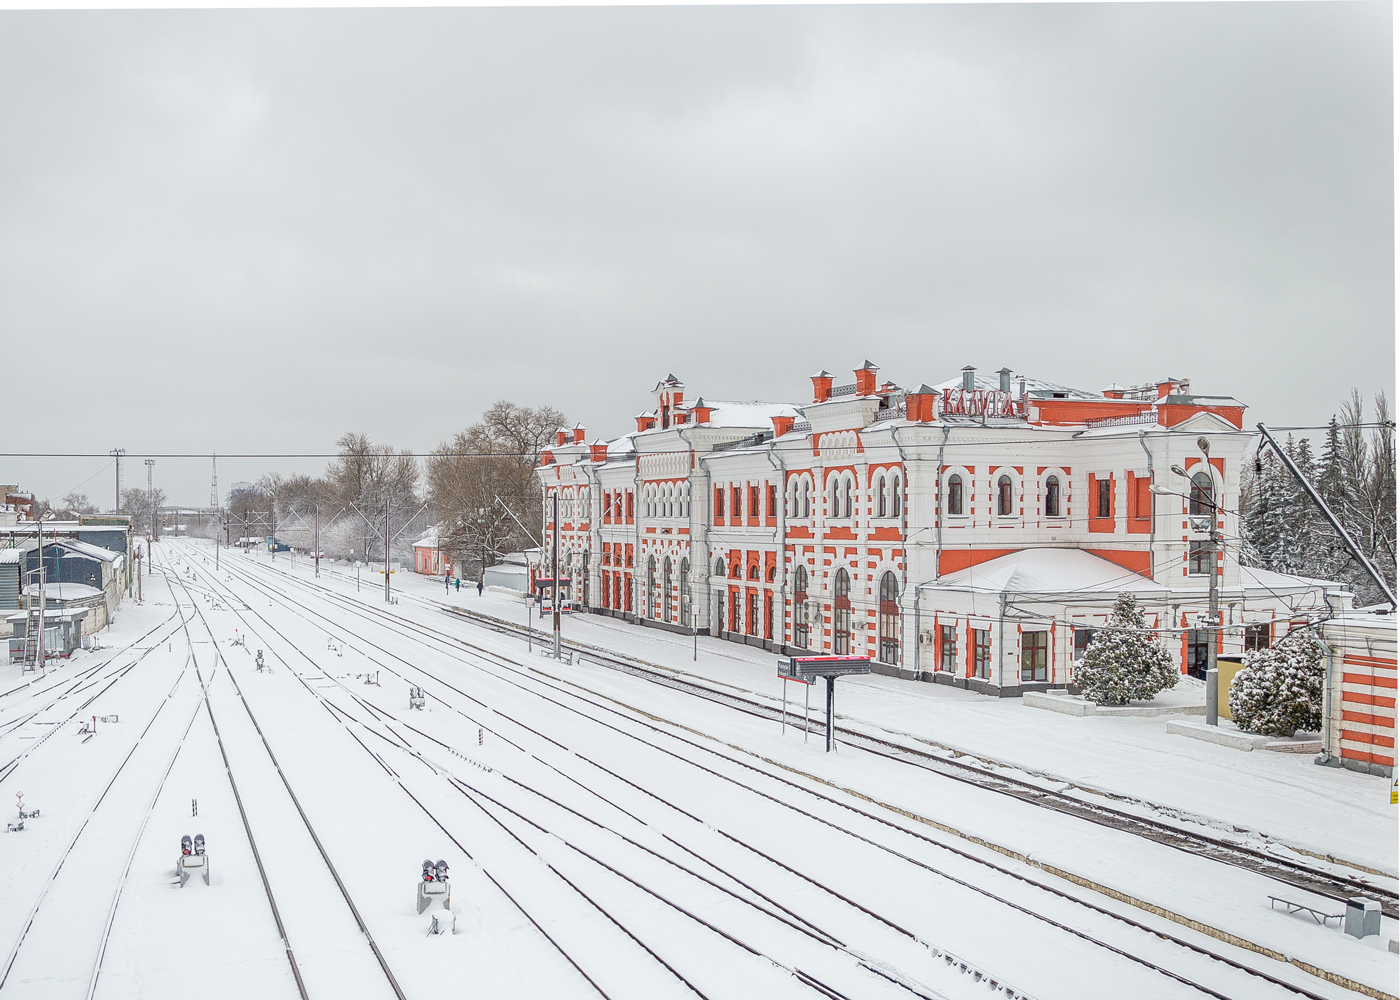 Moscow Railway — Stations